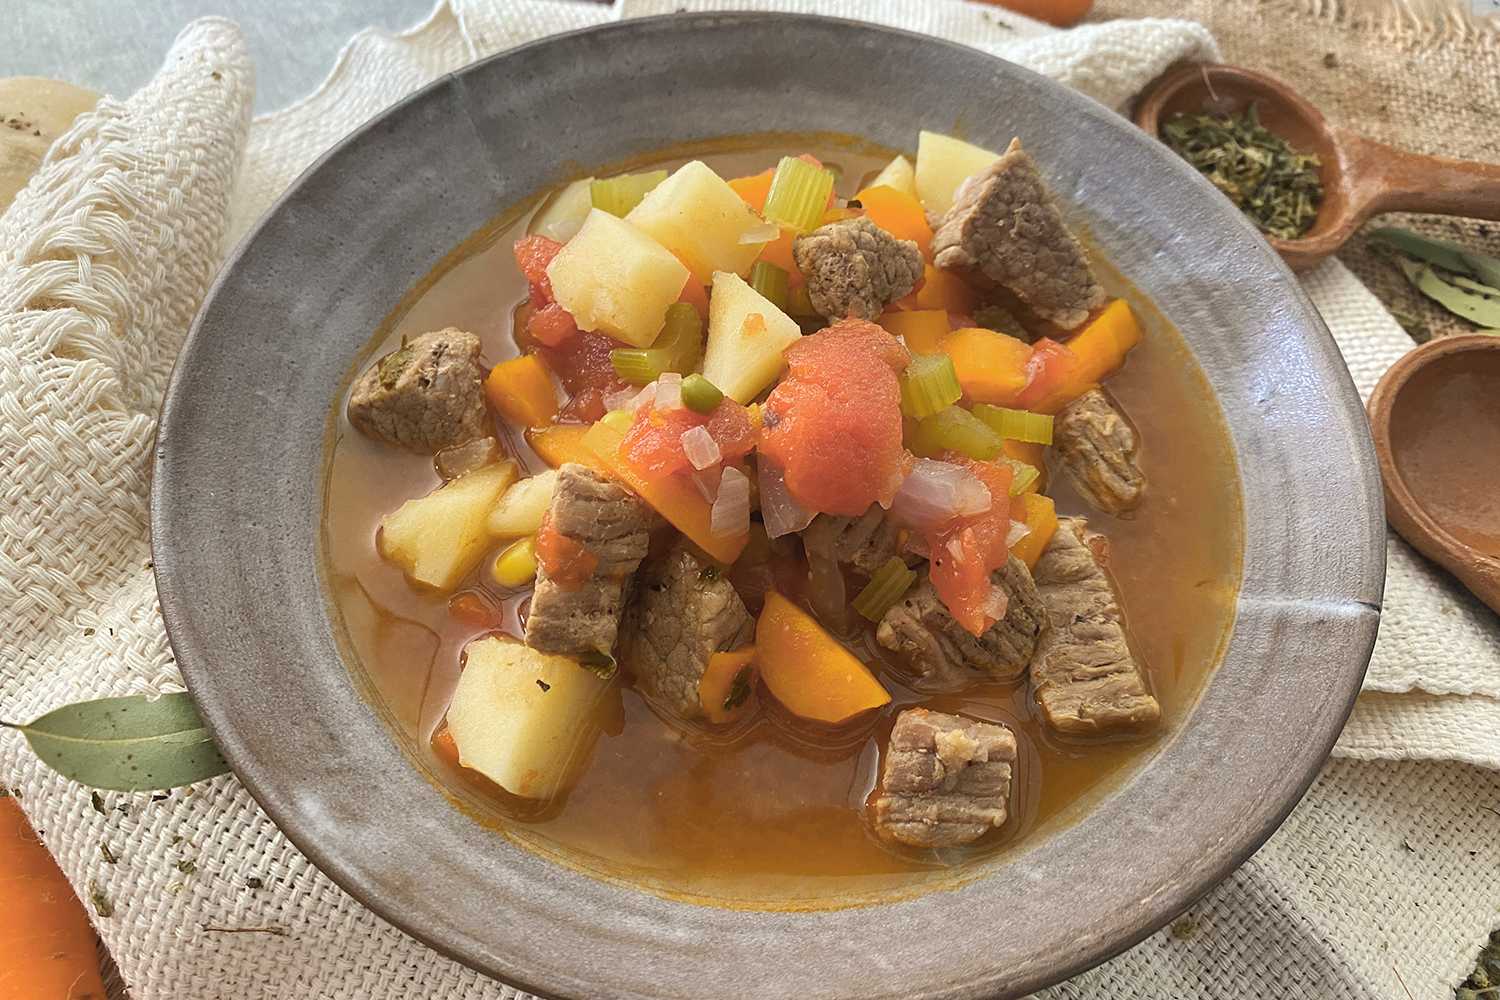 Beed cubes with potato cubes, chopped celery, carrot slices in a brown soup